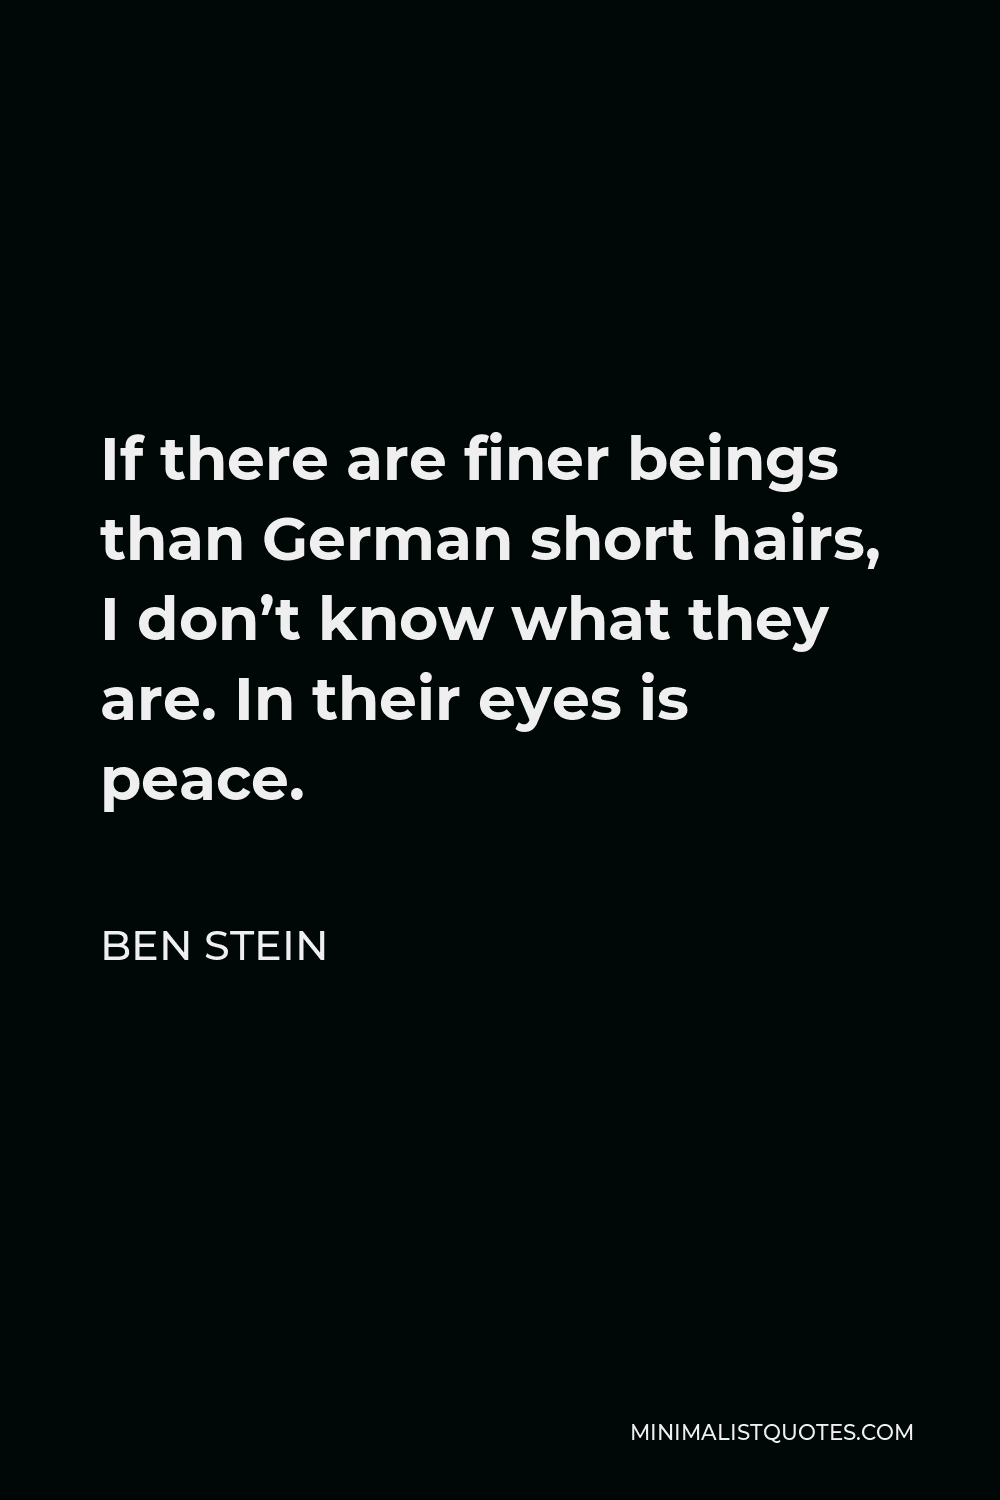 Ben Stein Quote - If there are finer beings than German short hairs, I don’t know what they are. In their eyes is peace.